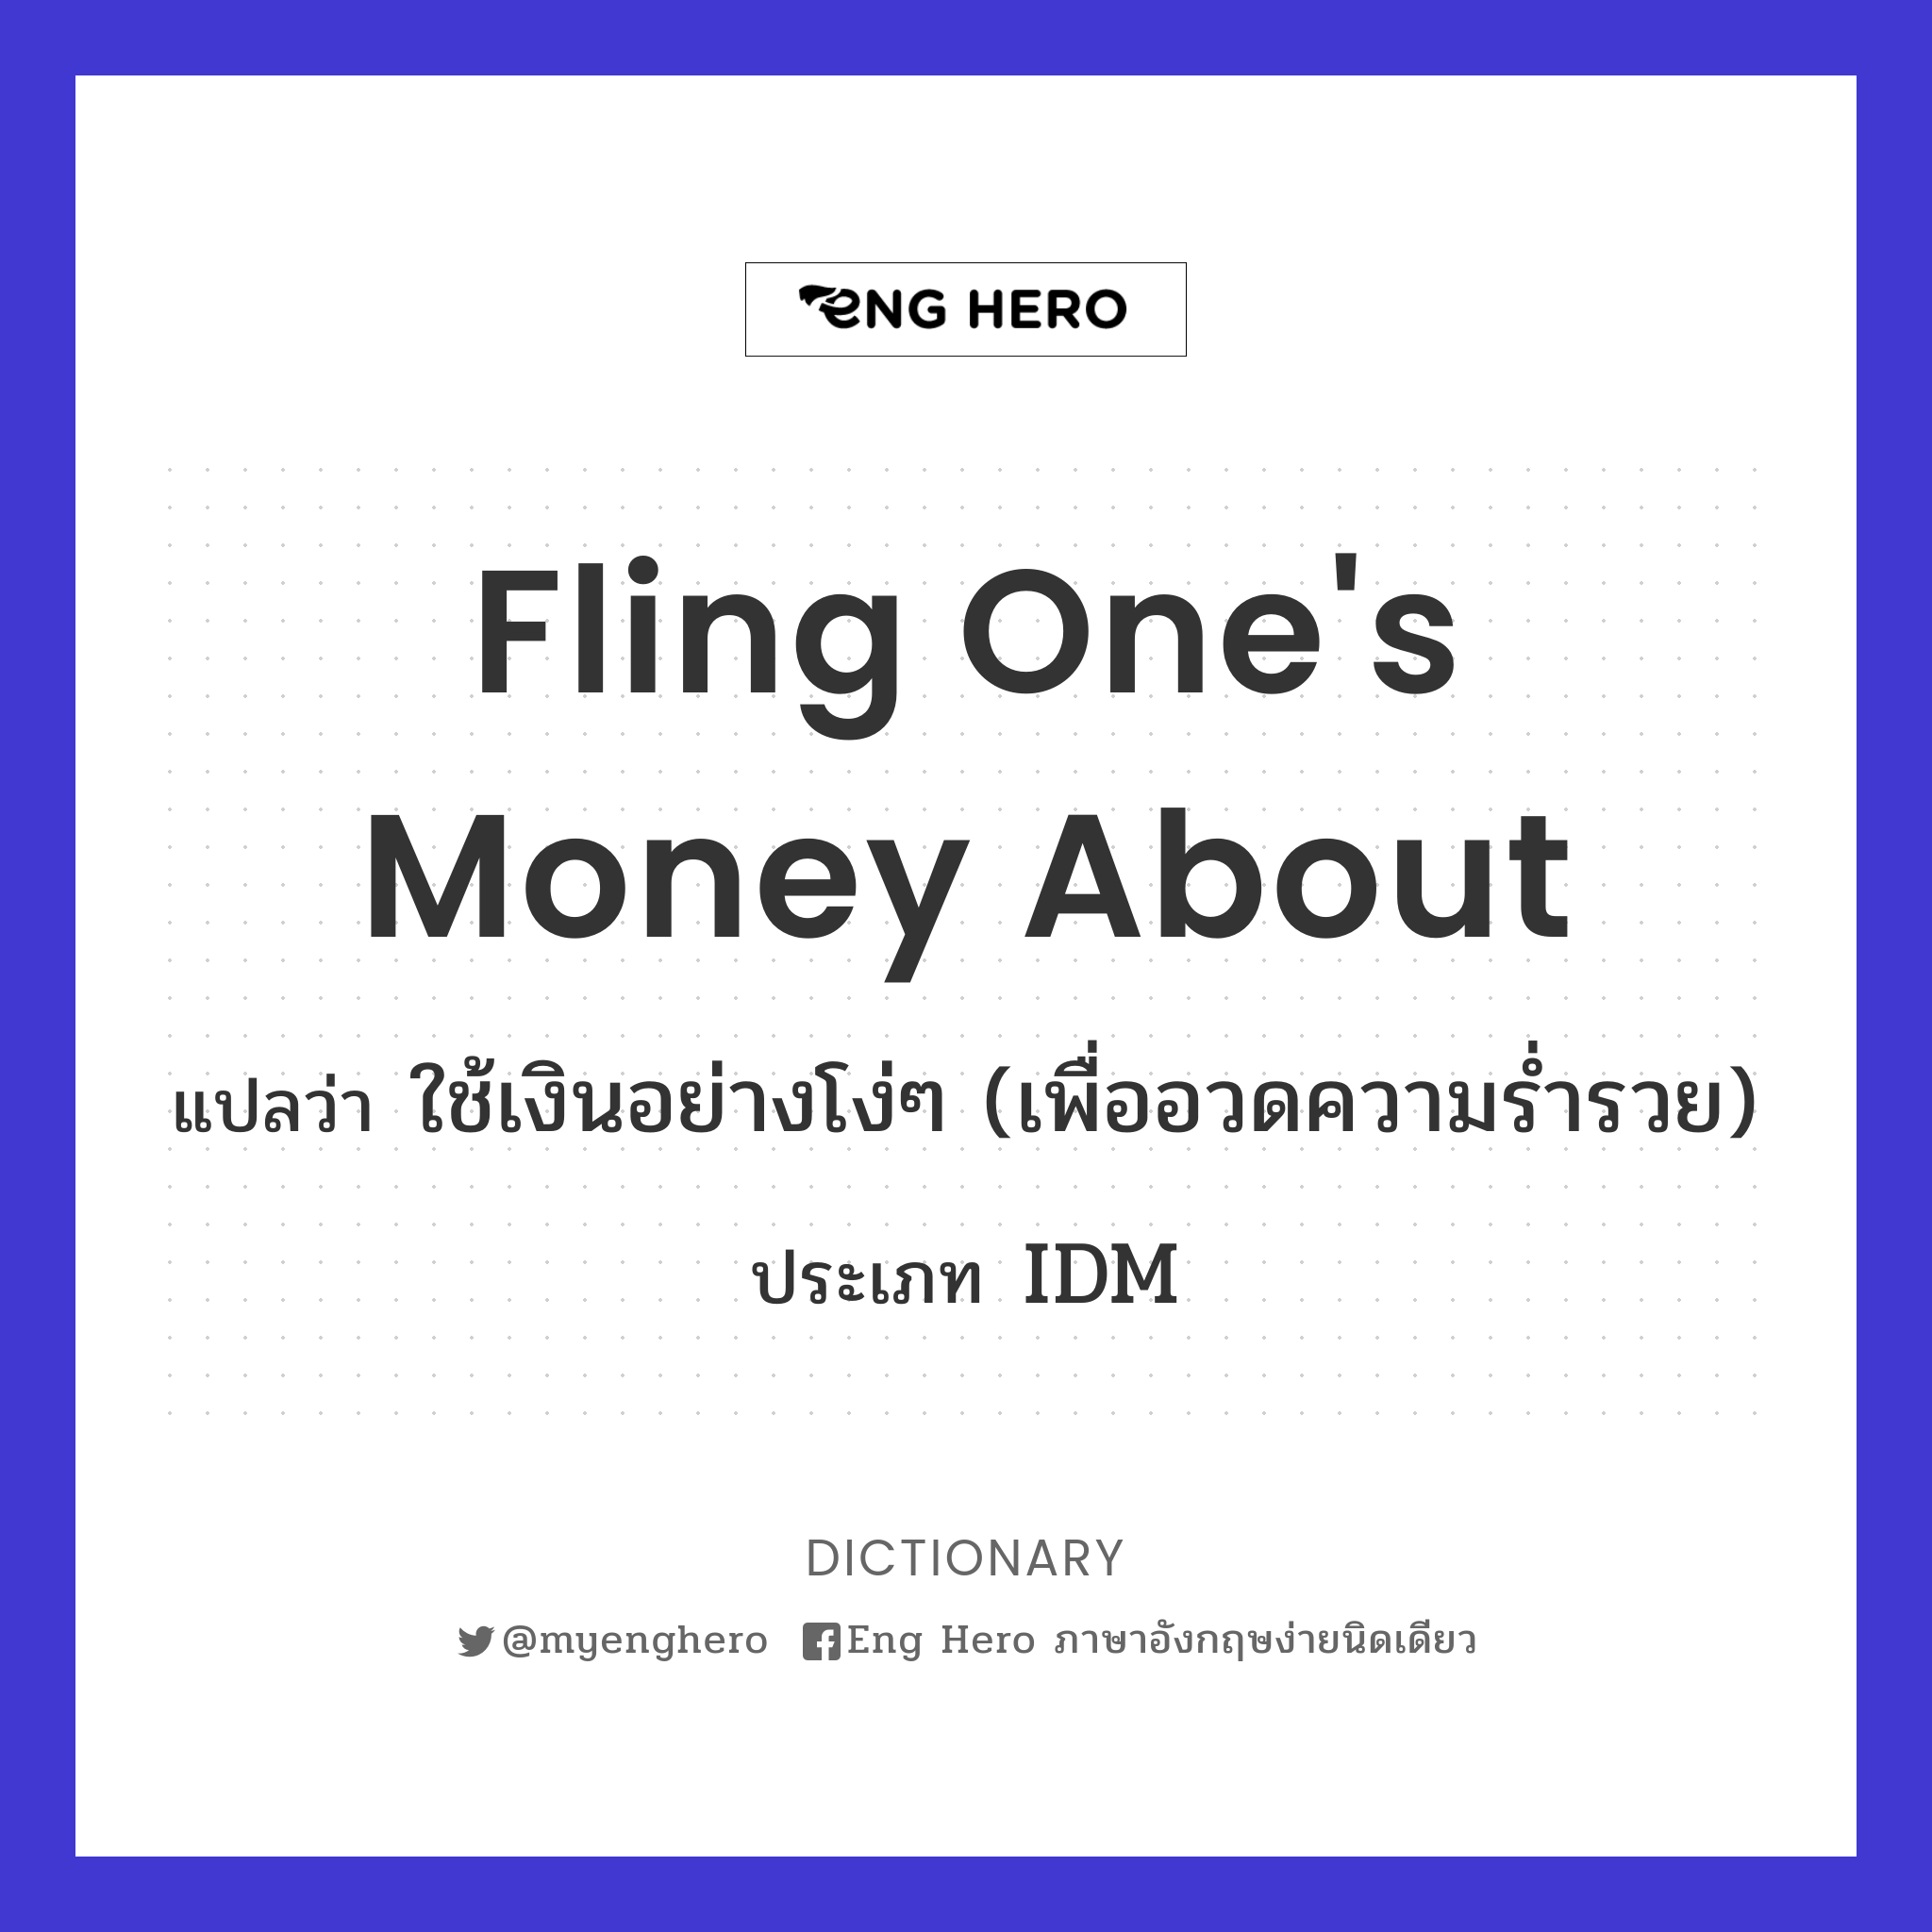 fling one's money about